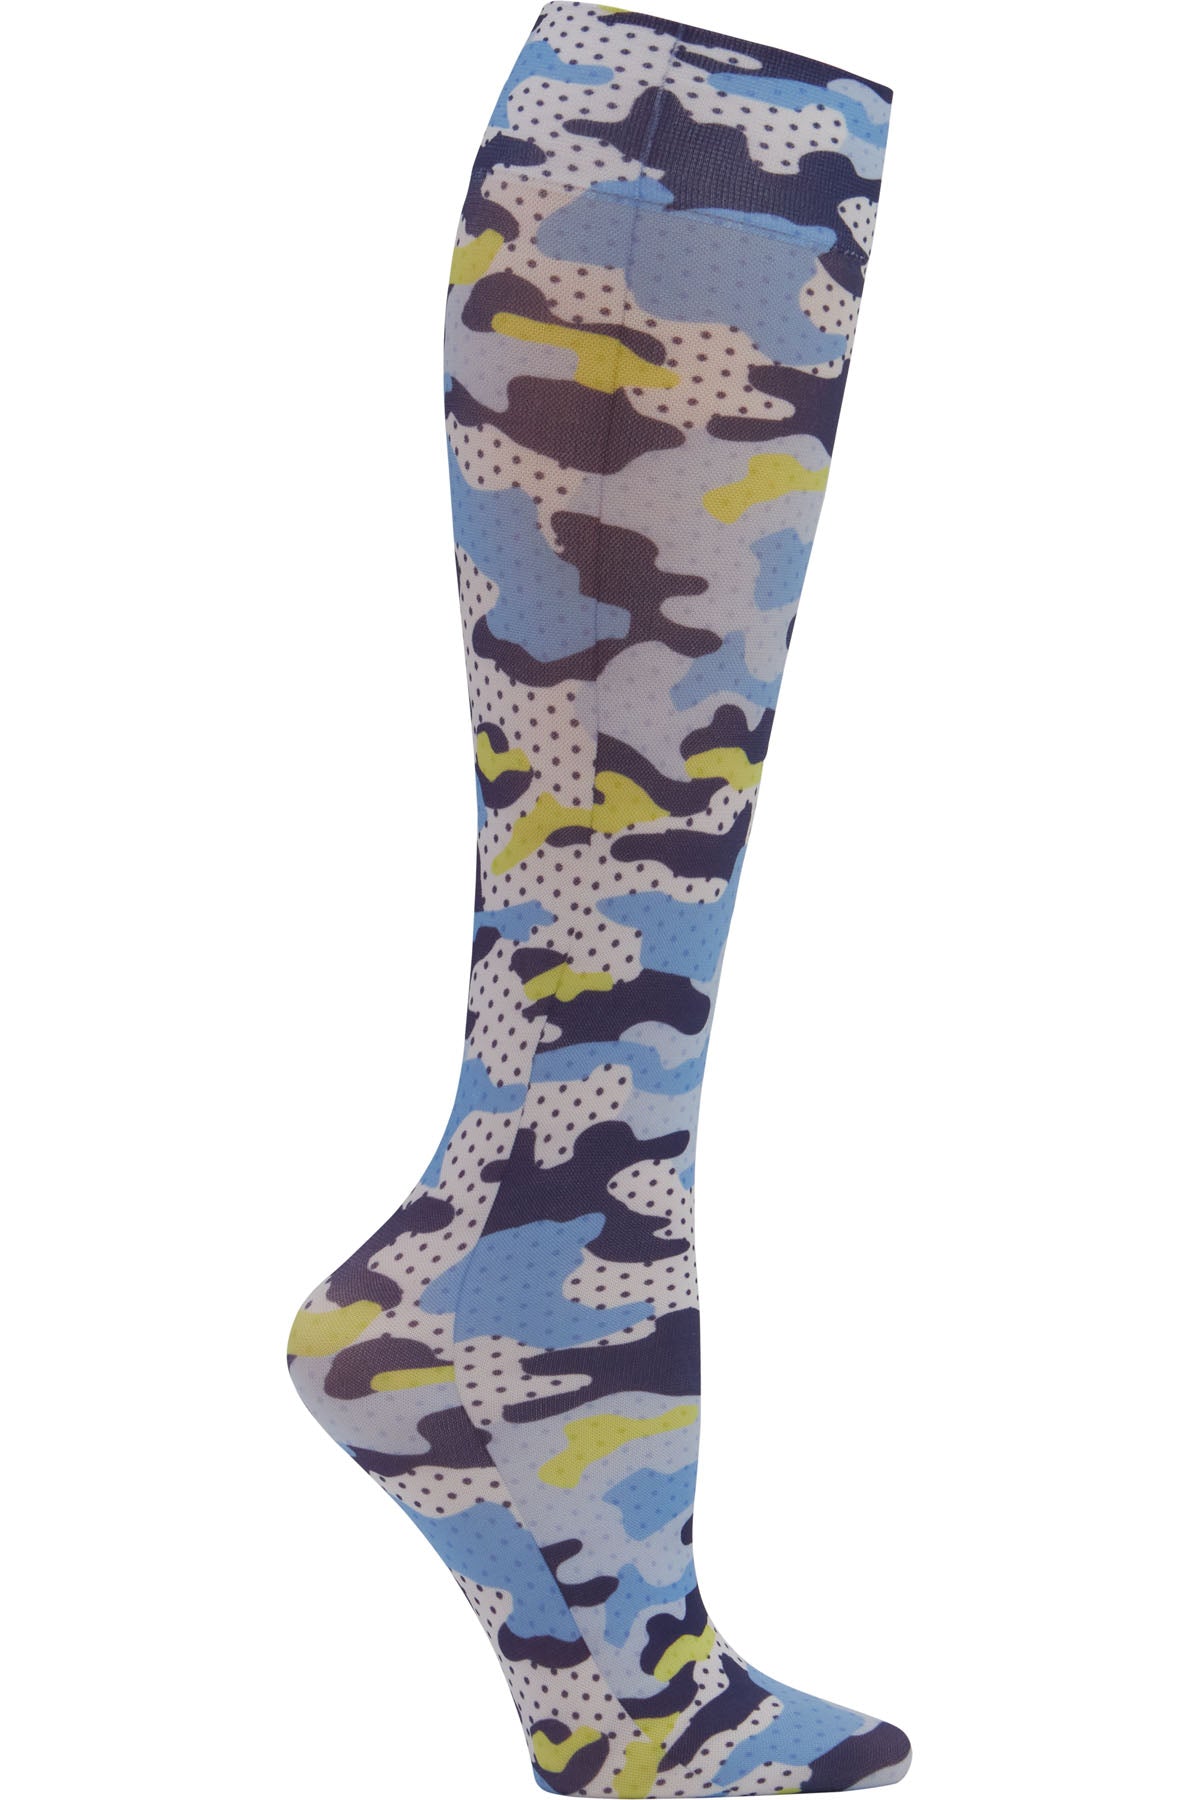 Cherokee Fashion Support Mild Compression Socks 8-15 mmHg Wide Calf Polka Dot Camo at Parker's Clothing and Shoes.